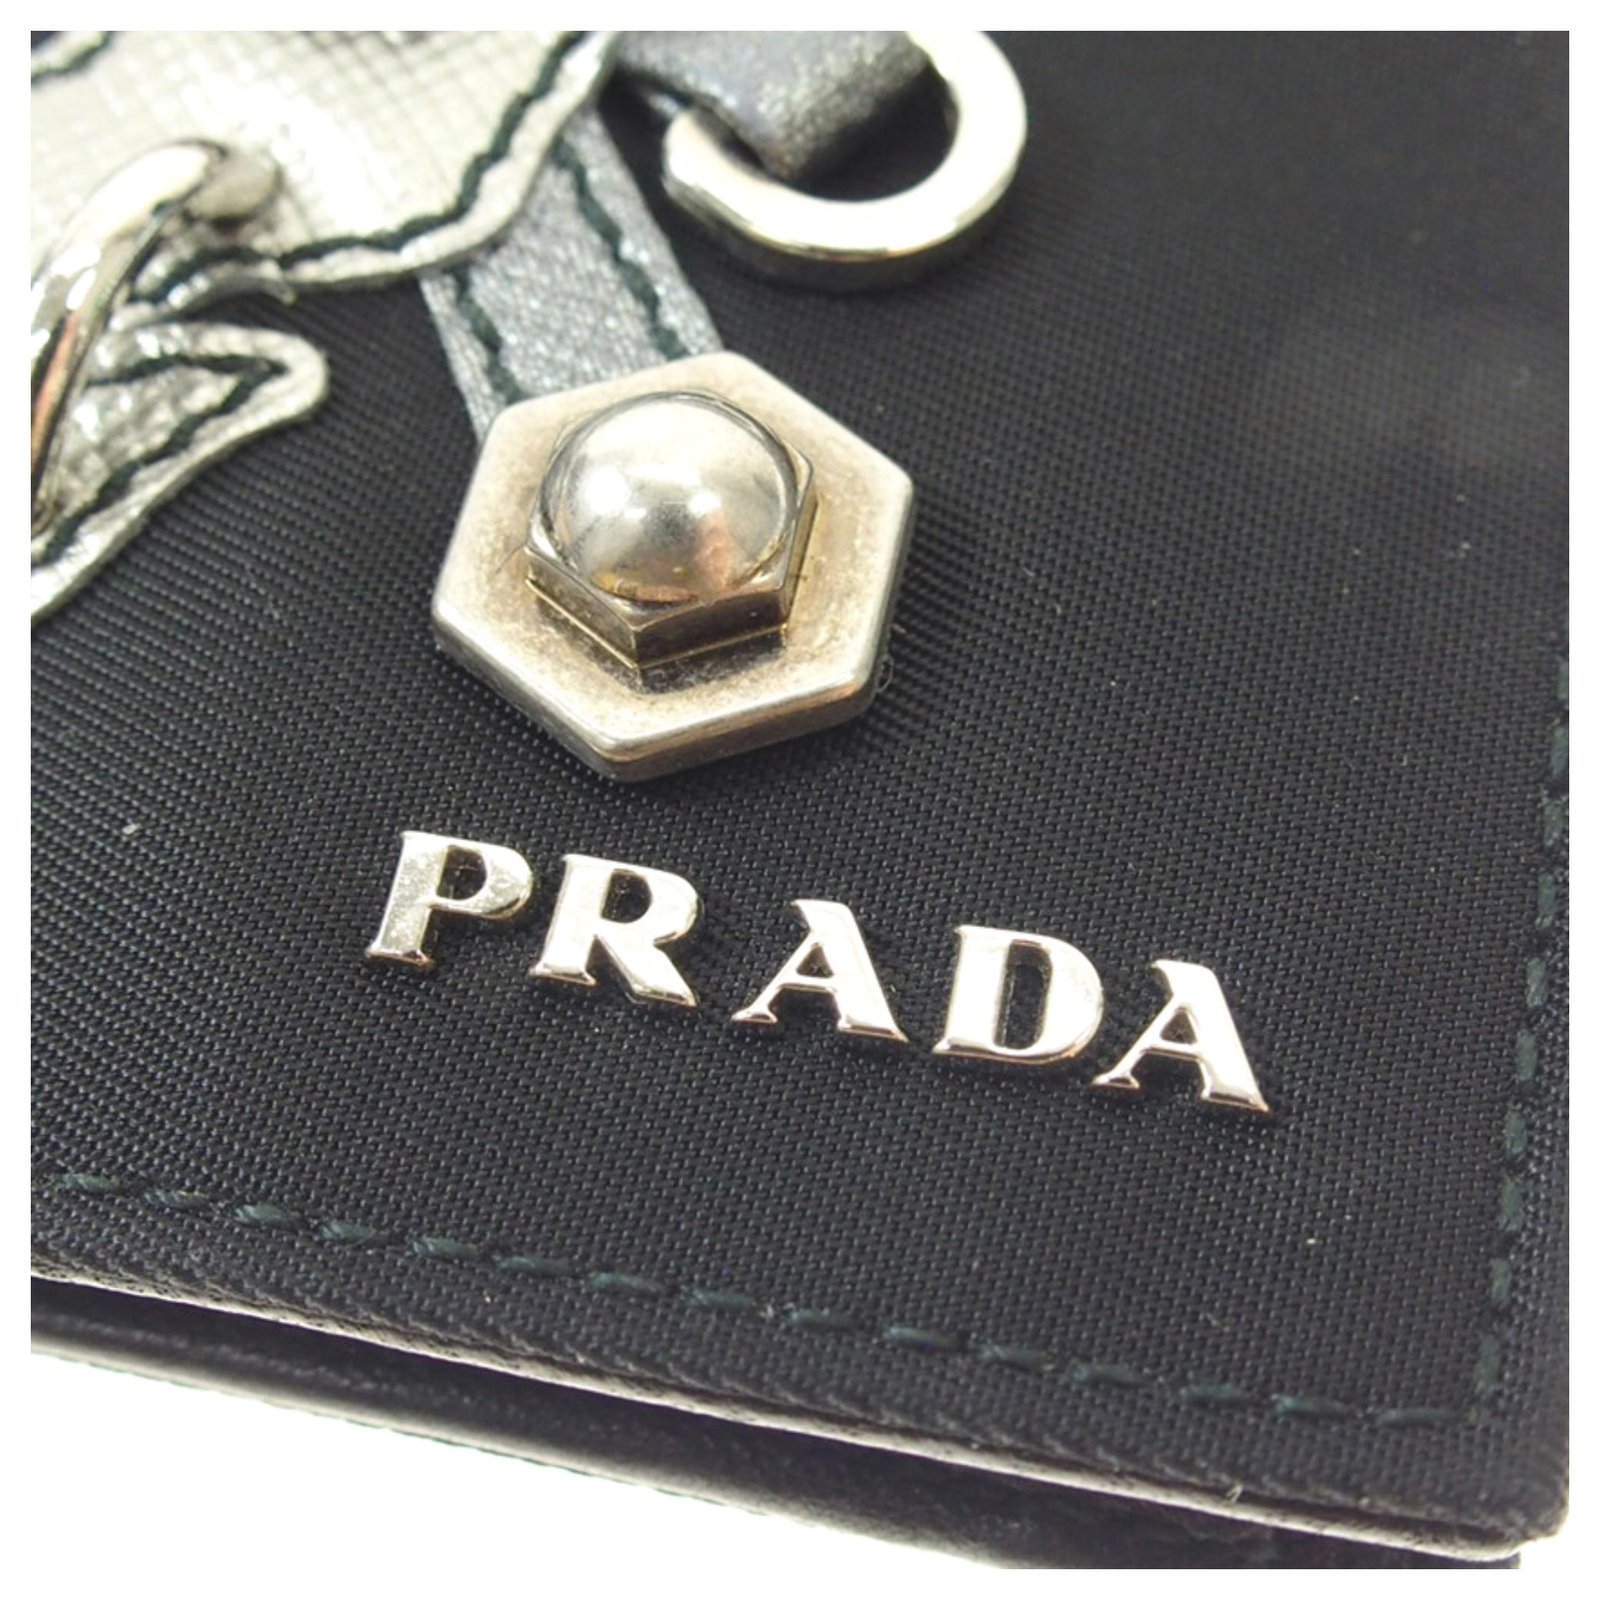 Prada skull and playing cards motif wallets and pouches.